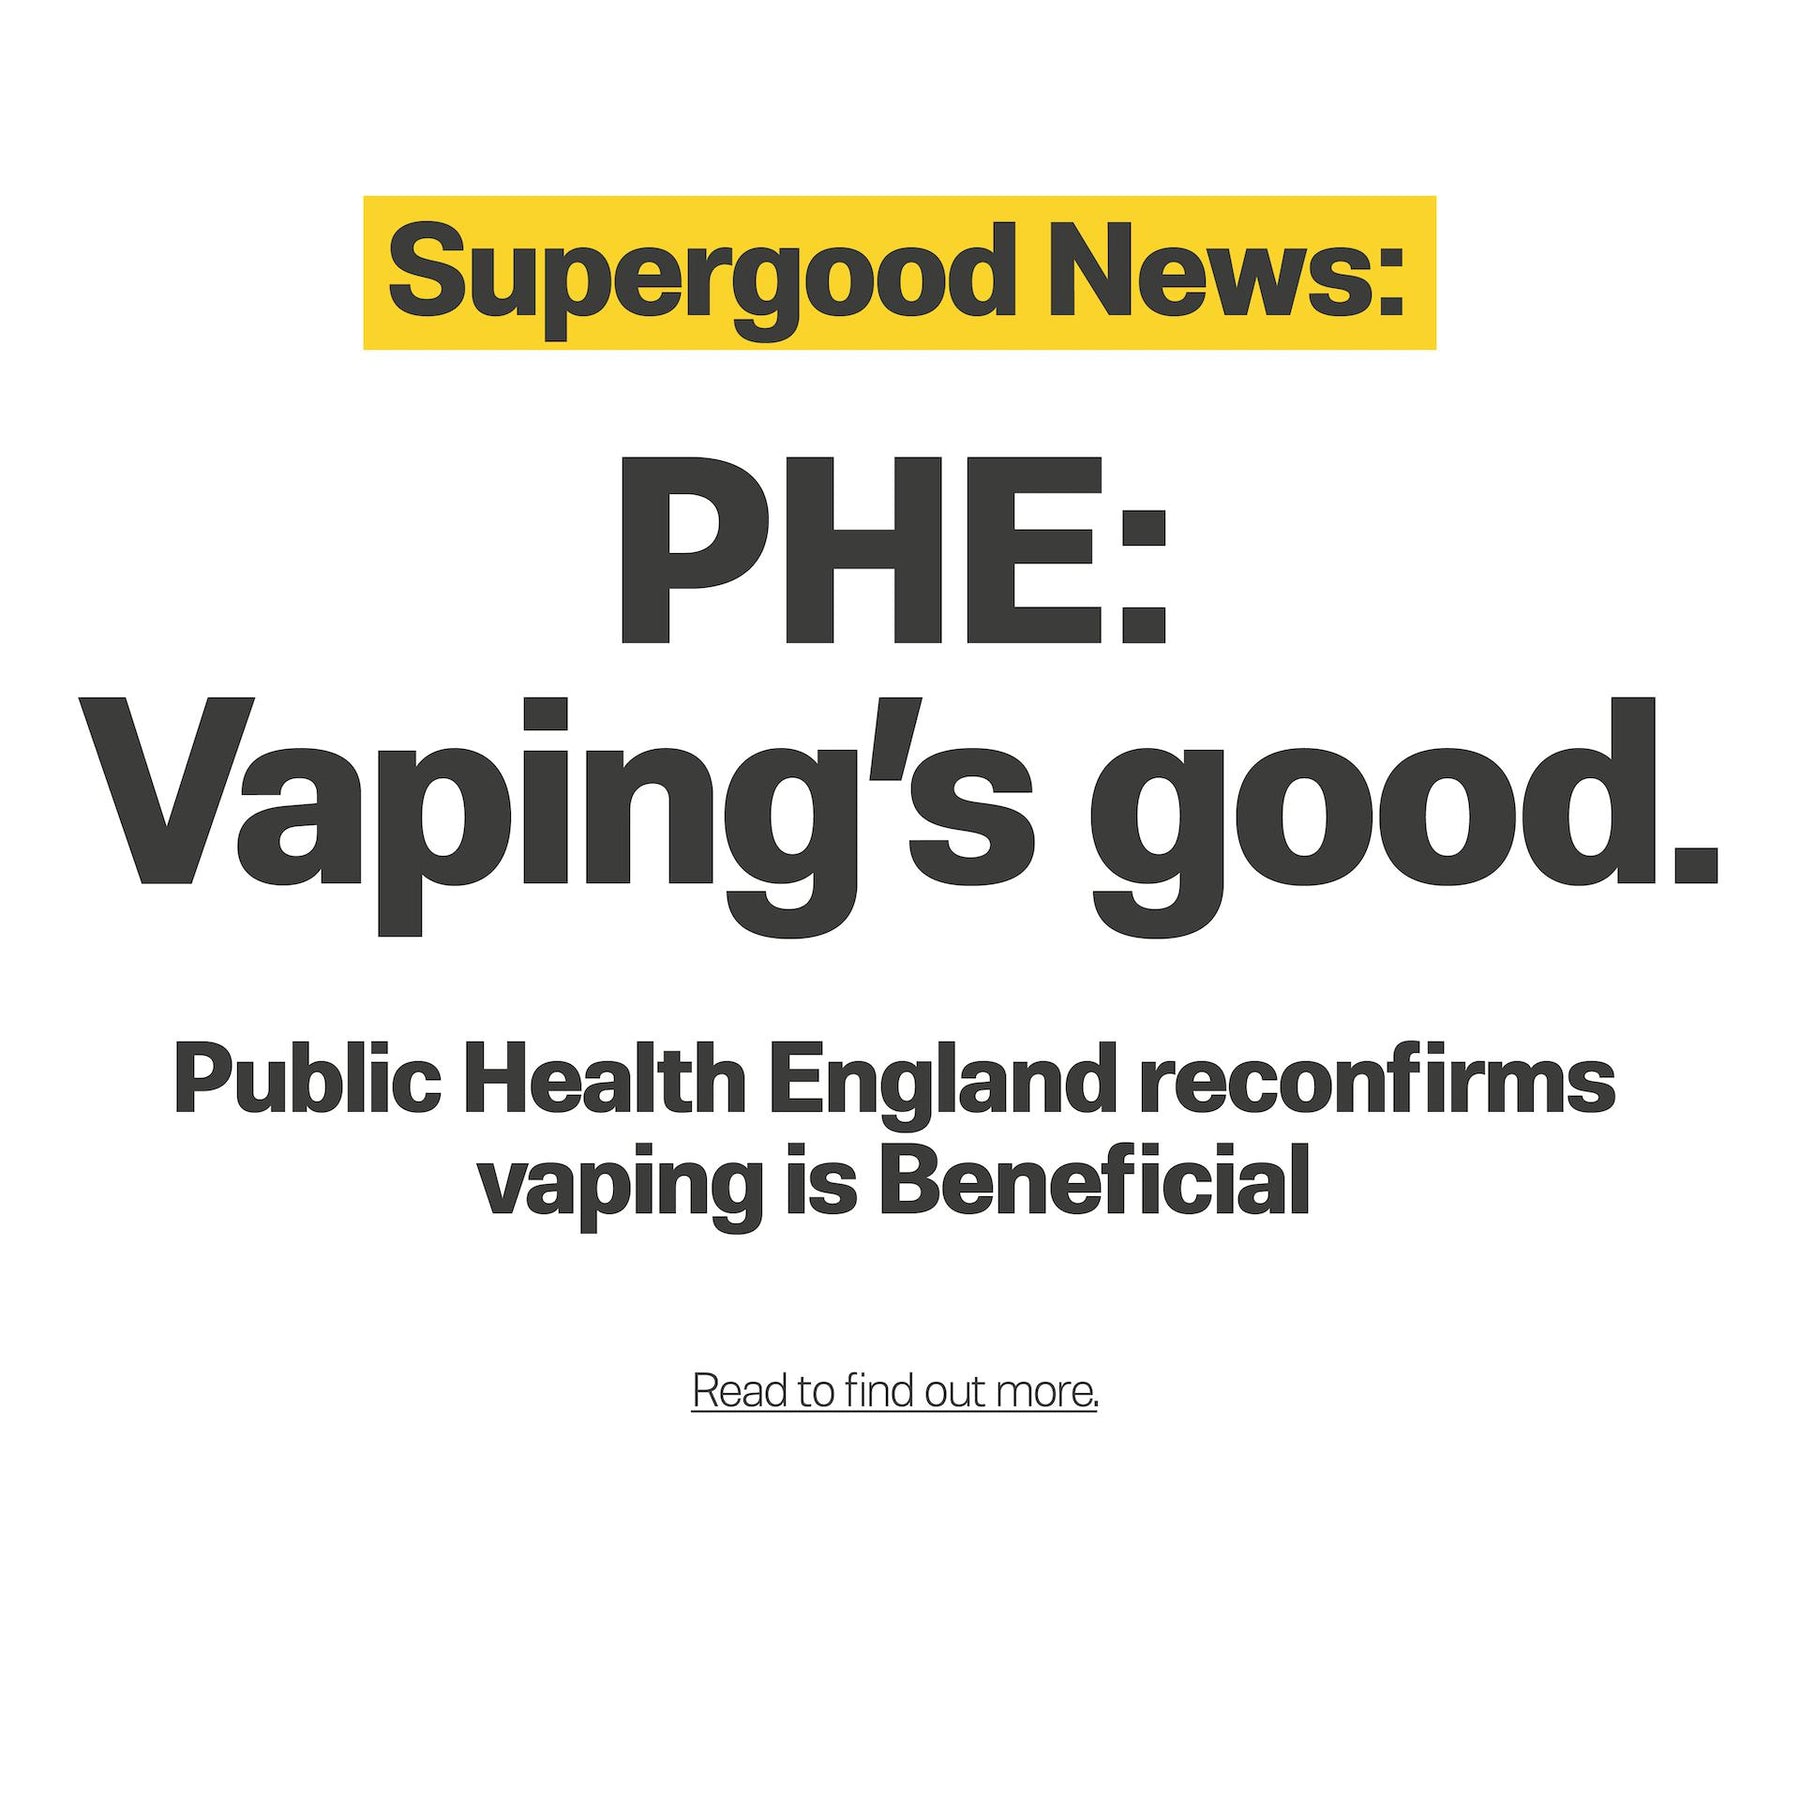 Public Health England reconfirms vaping is beneficial